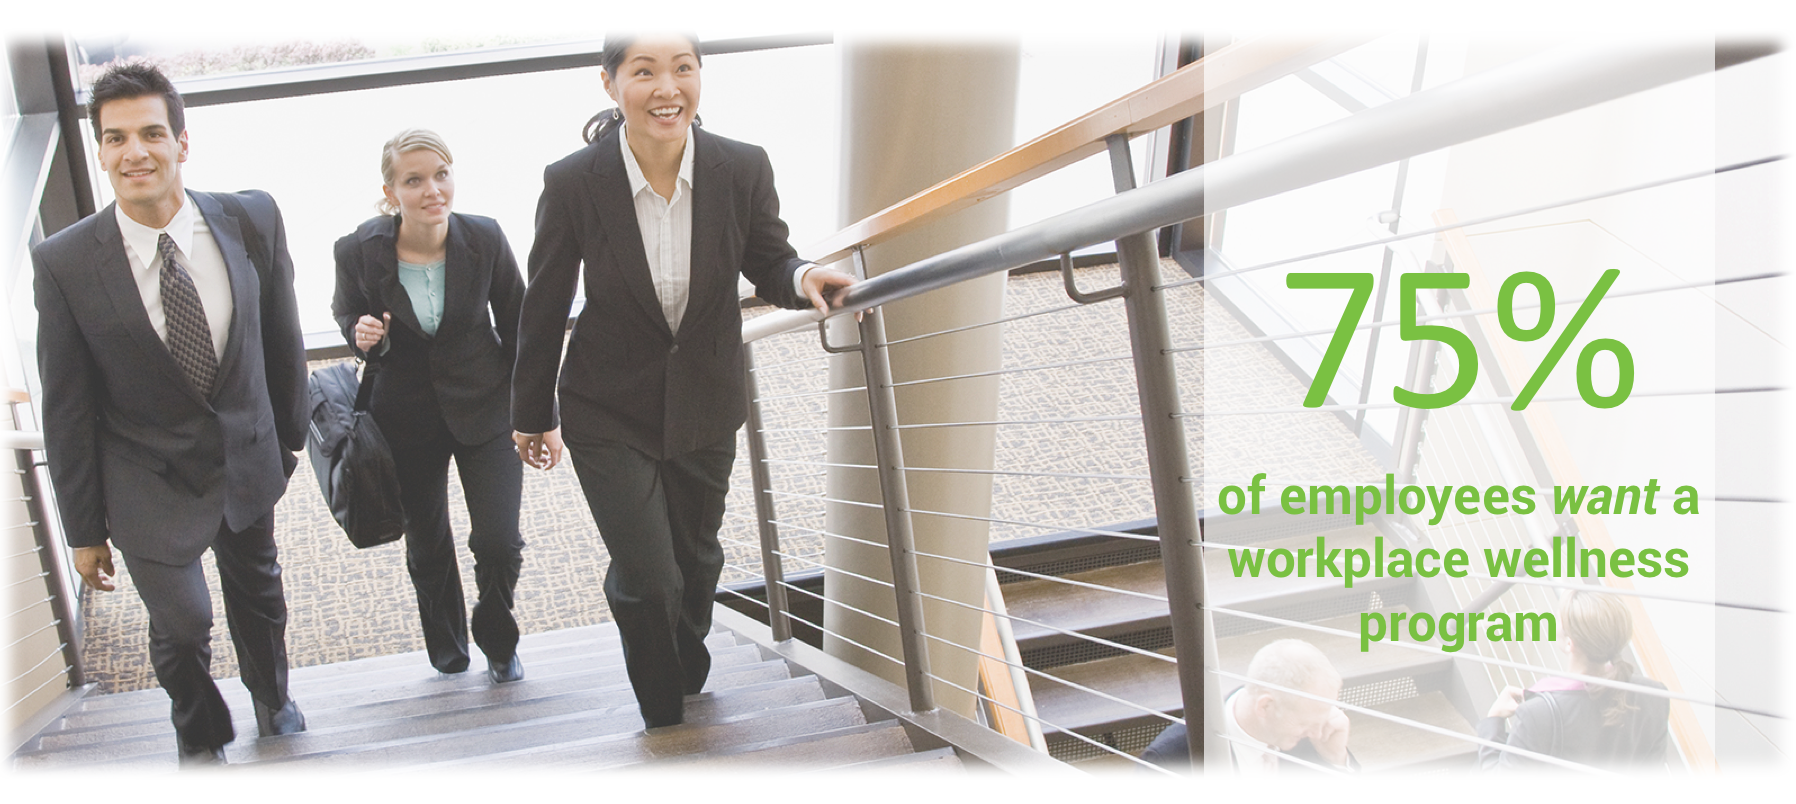 Three business professionals climbing stairs in office building